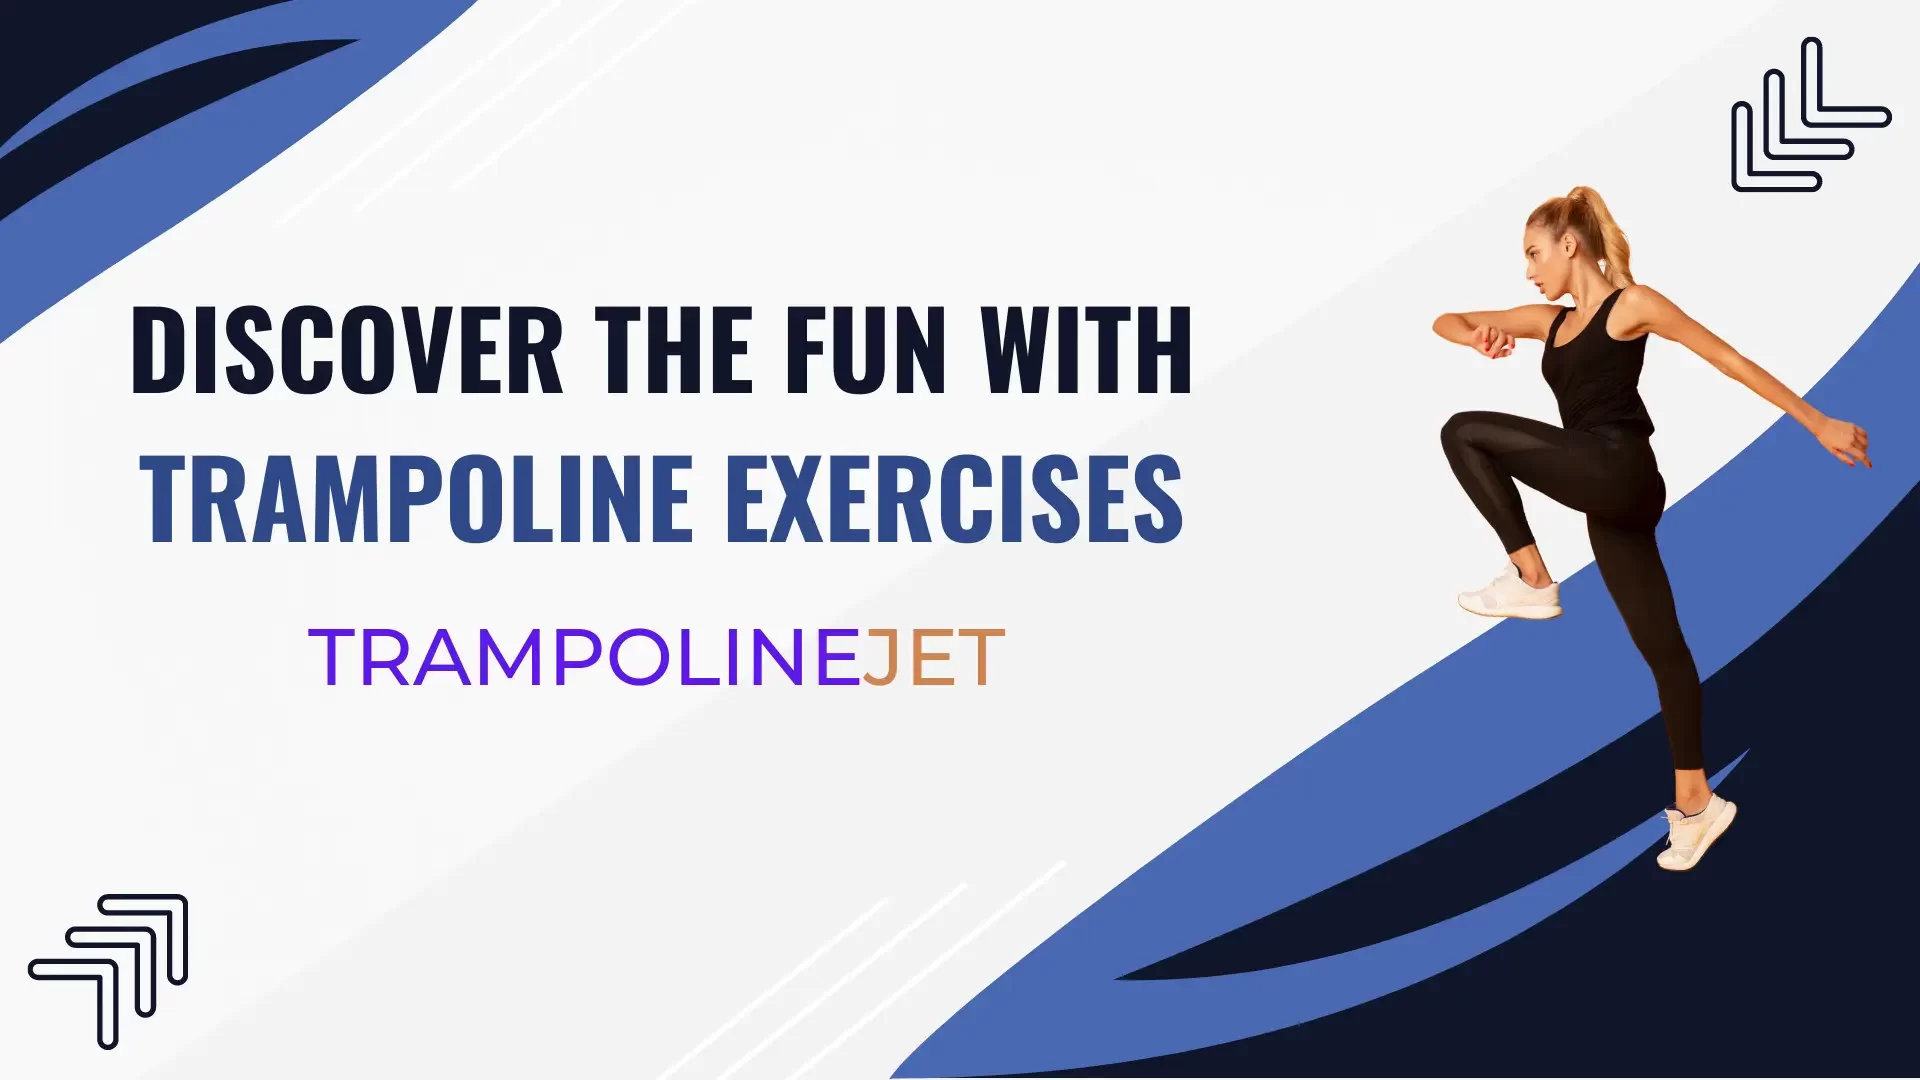 Fun with trampoline exercises